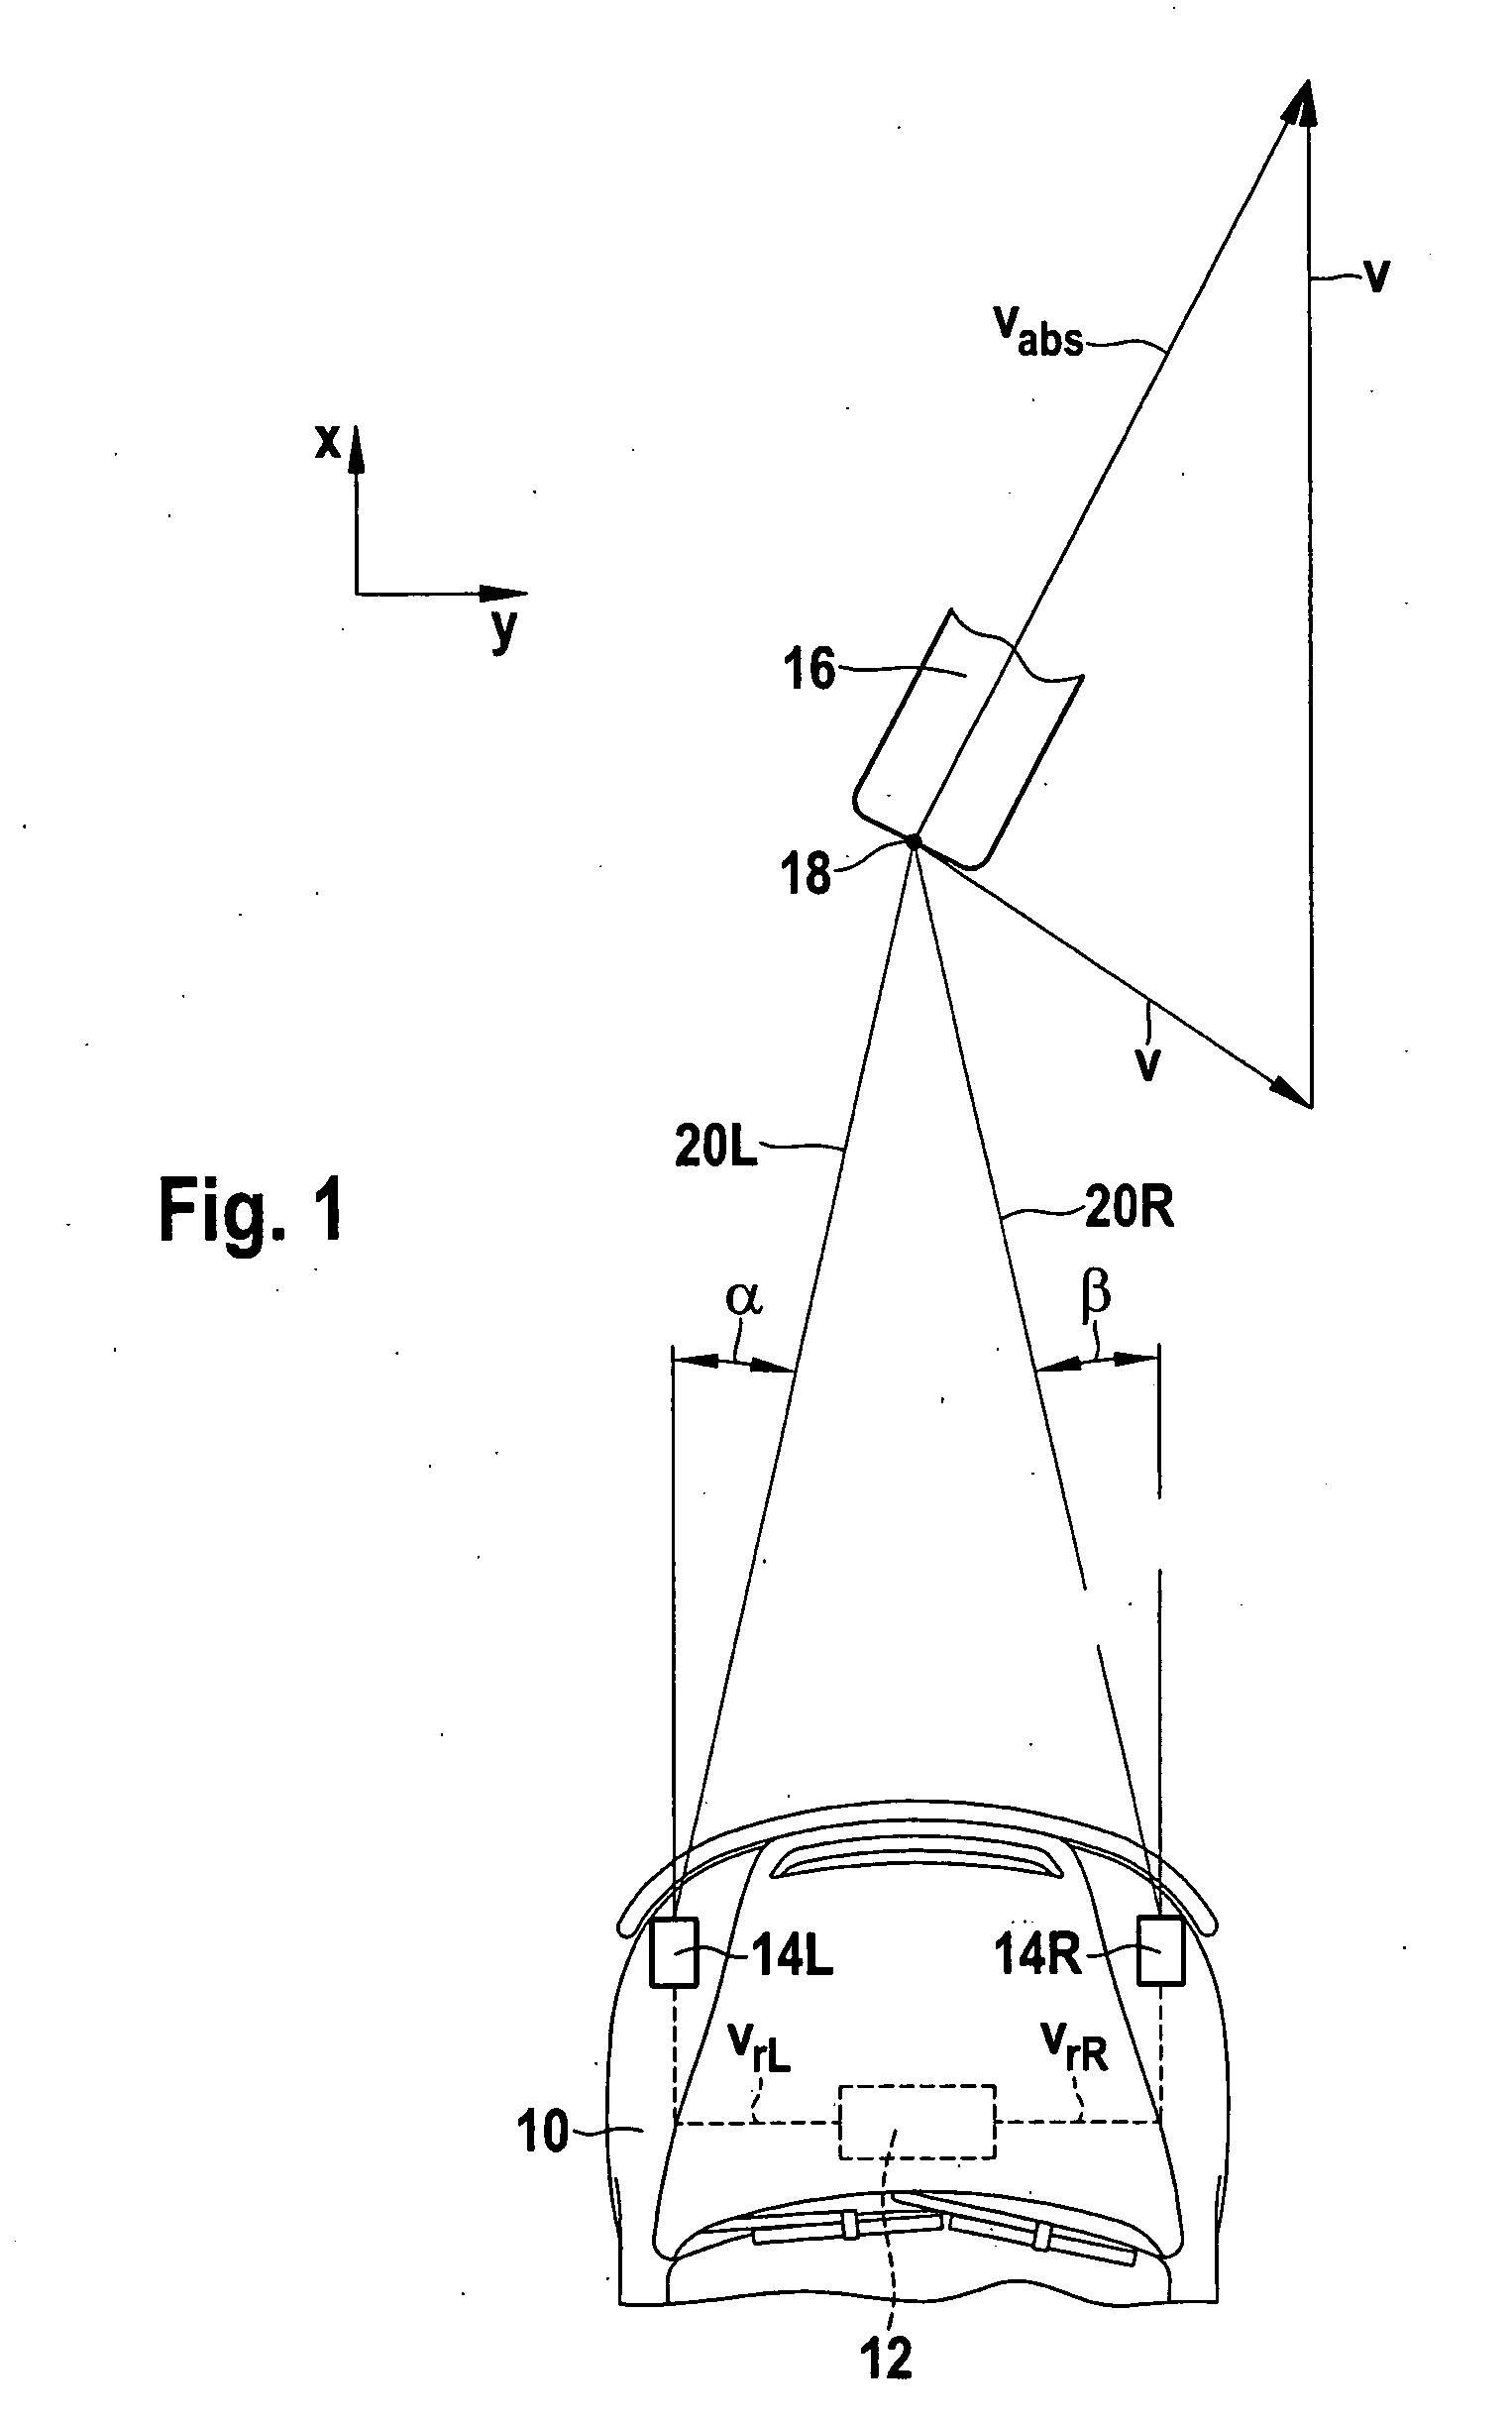 Method for measuring lateral movements in a driver assistance system